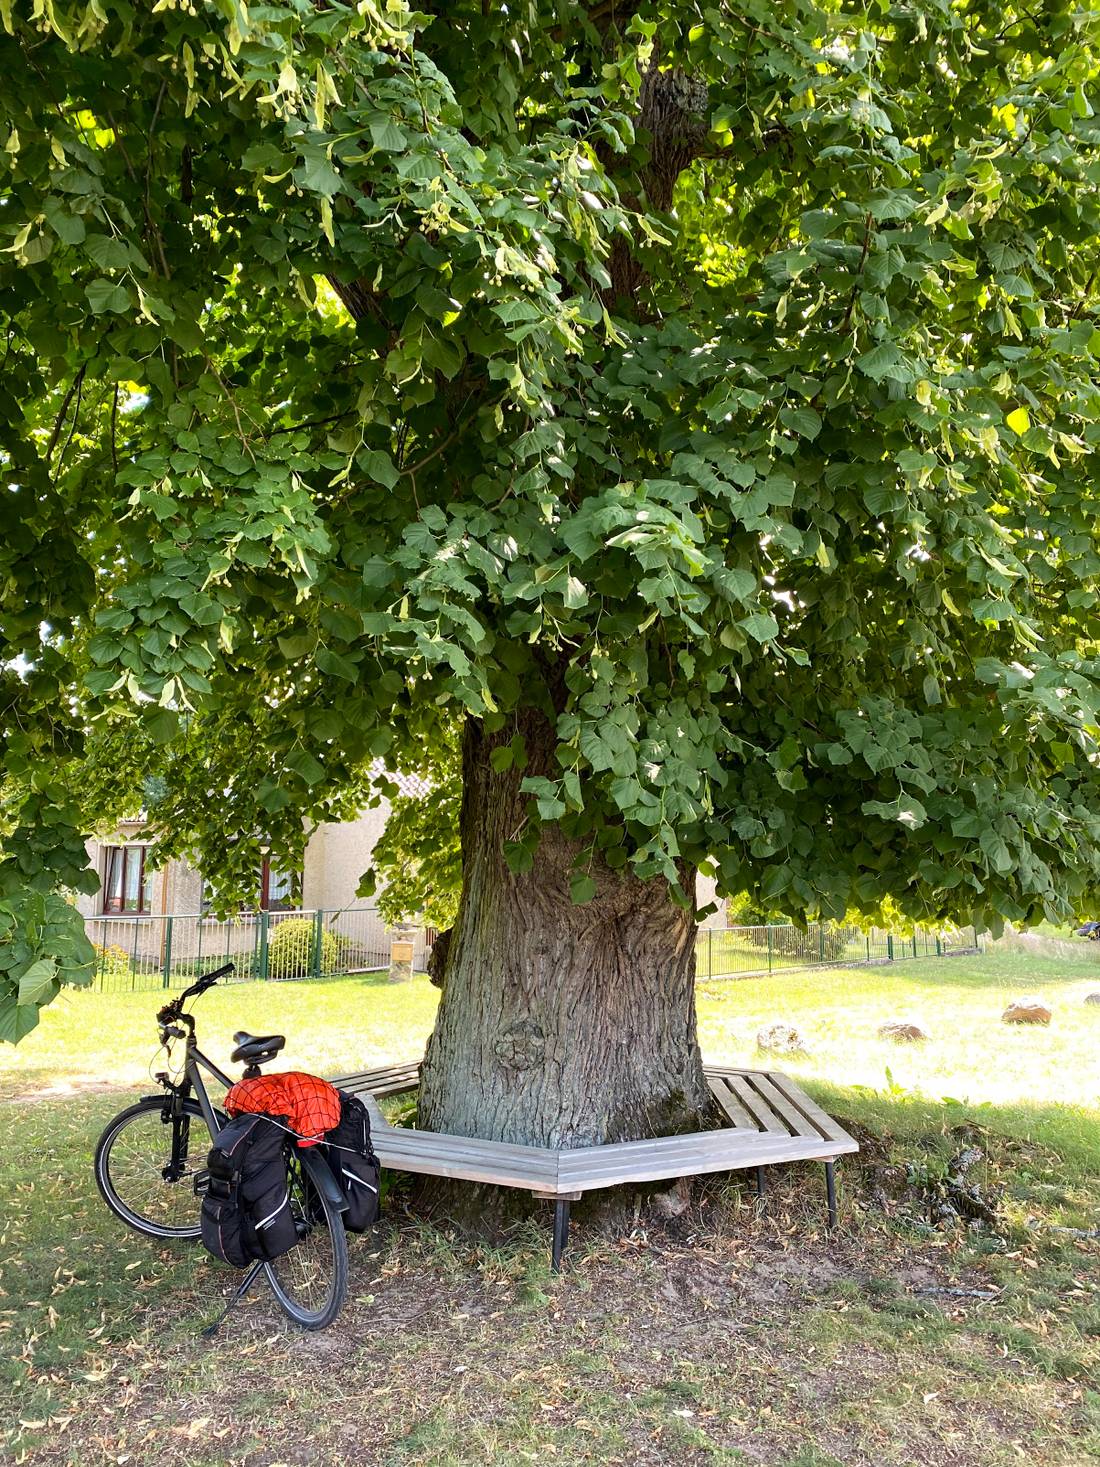 This old linden tree shade was too inviting